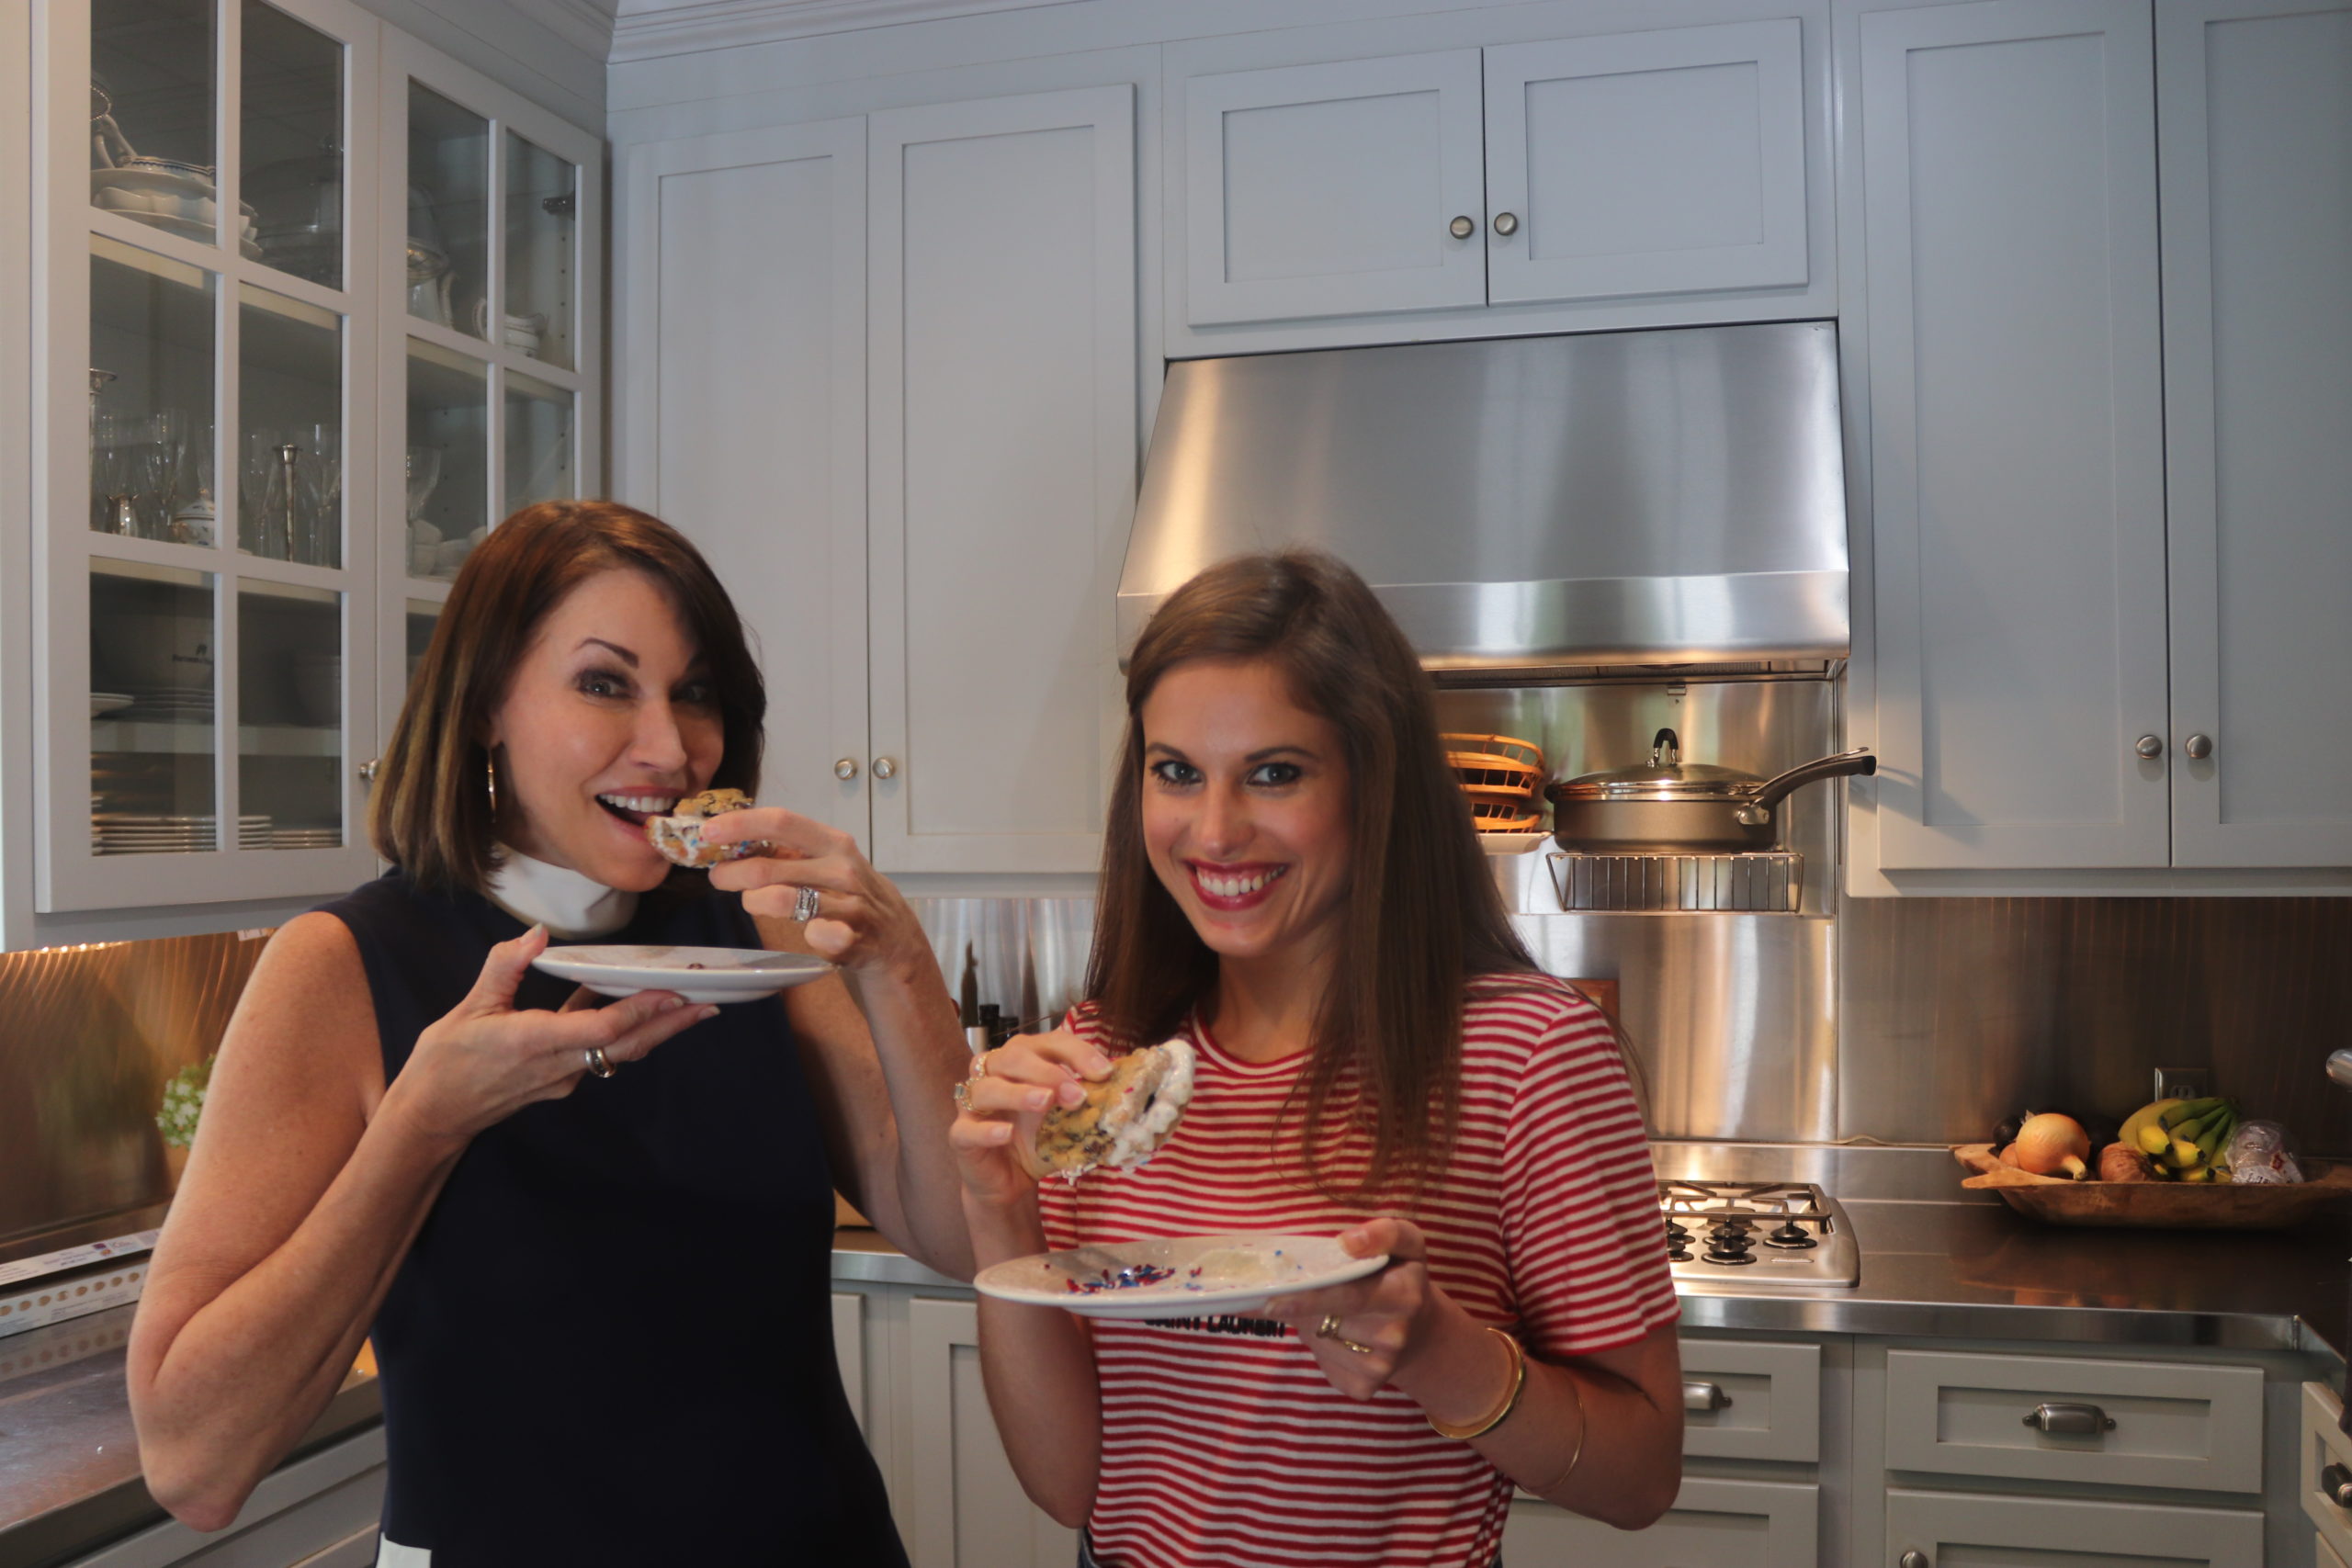 Two women standing in a kitchen, both with brown hair. One is wearing a navy top with a white collar and the other is wearing a red and white striped shirt. They are eating 4th of july themed ice cream sandwiches